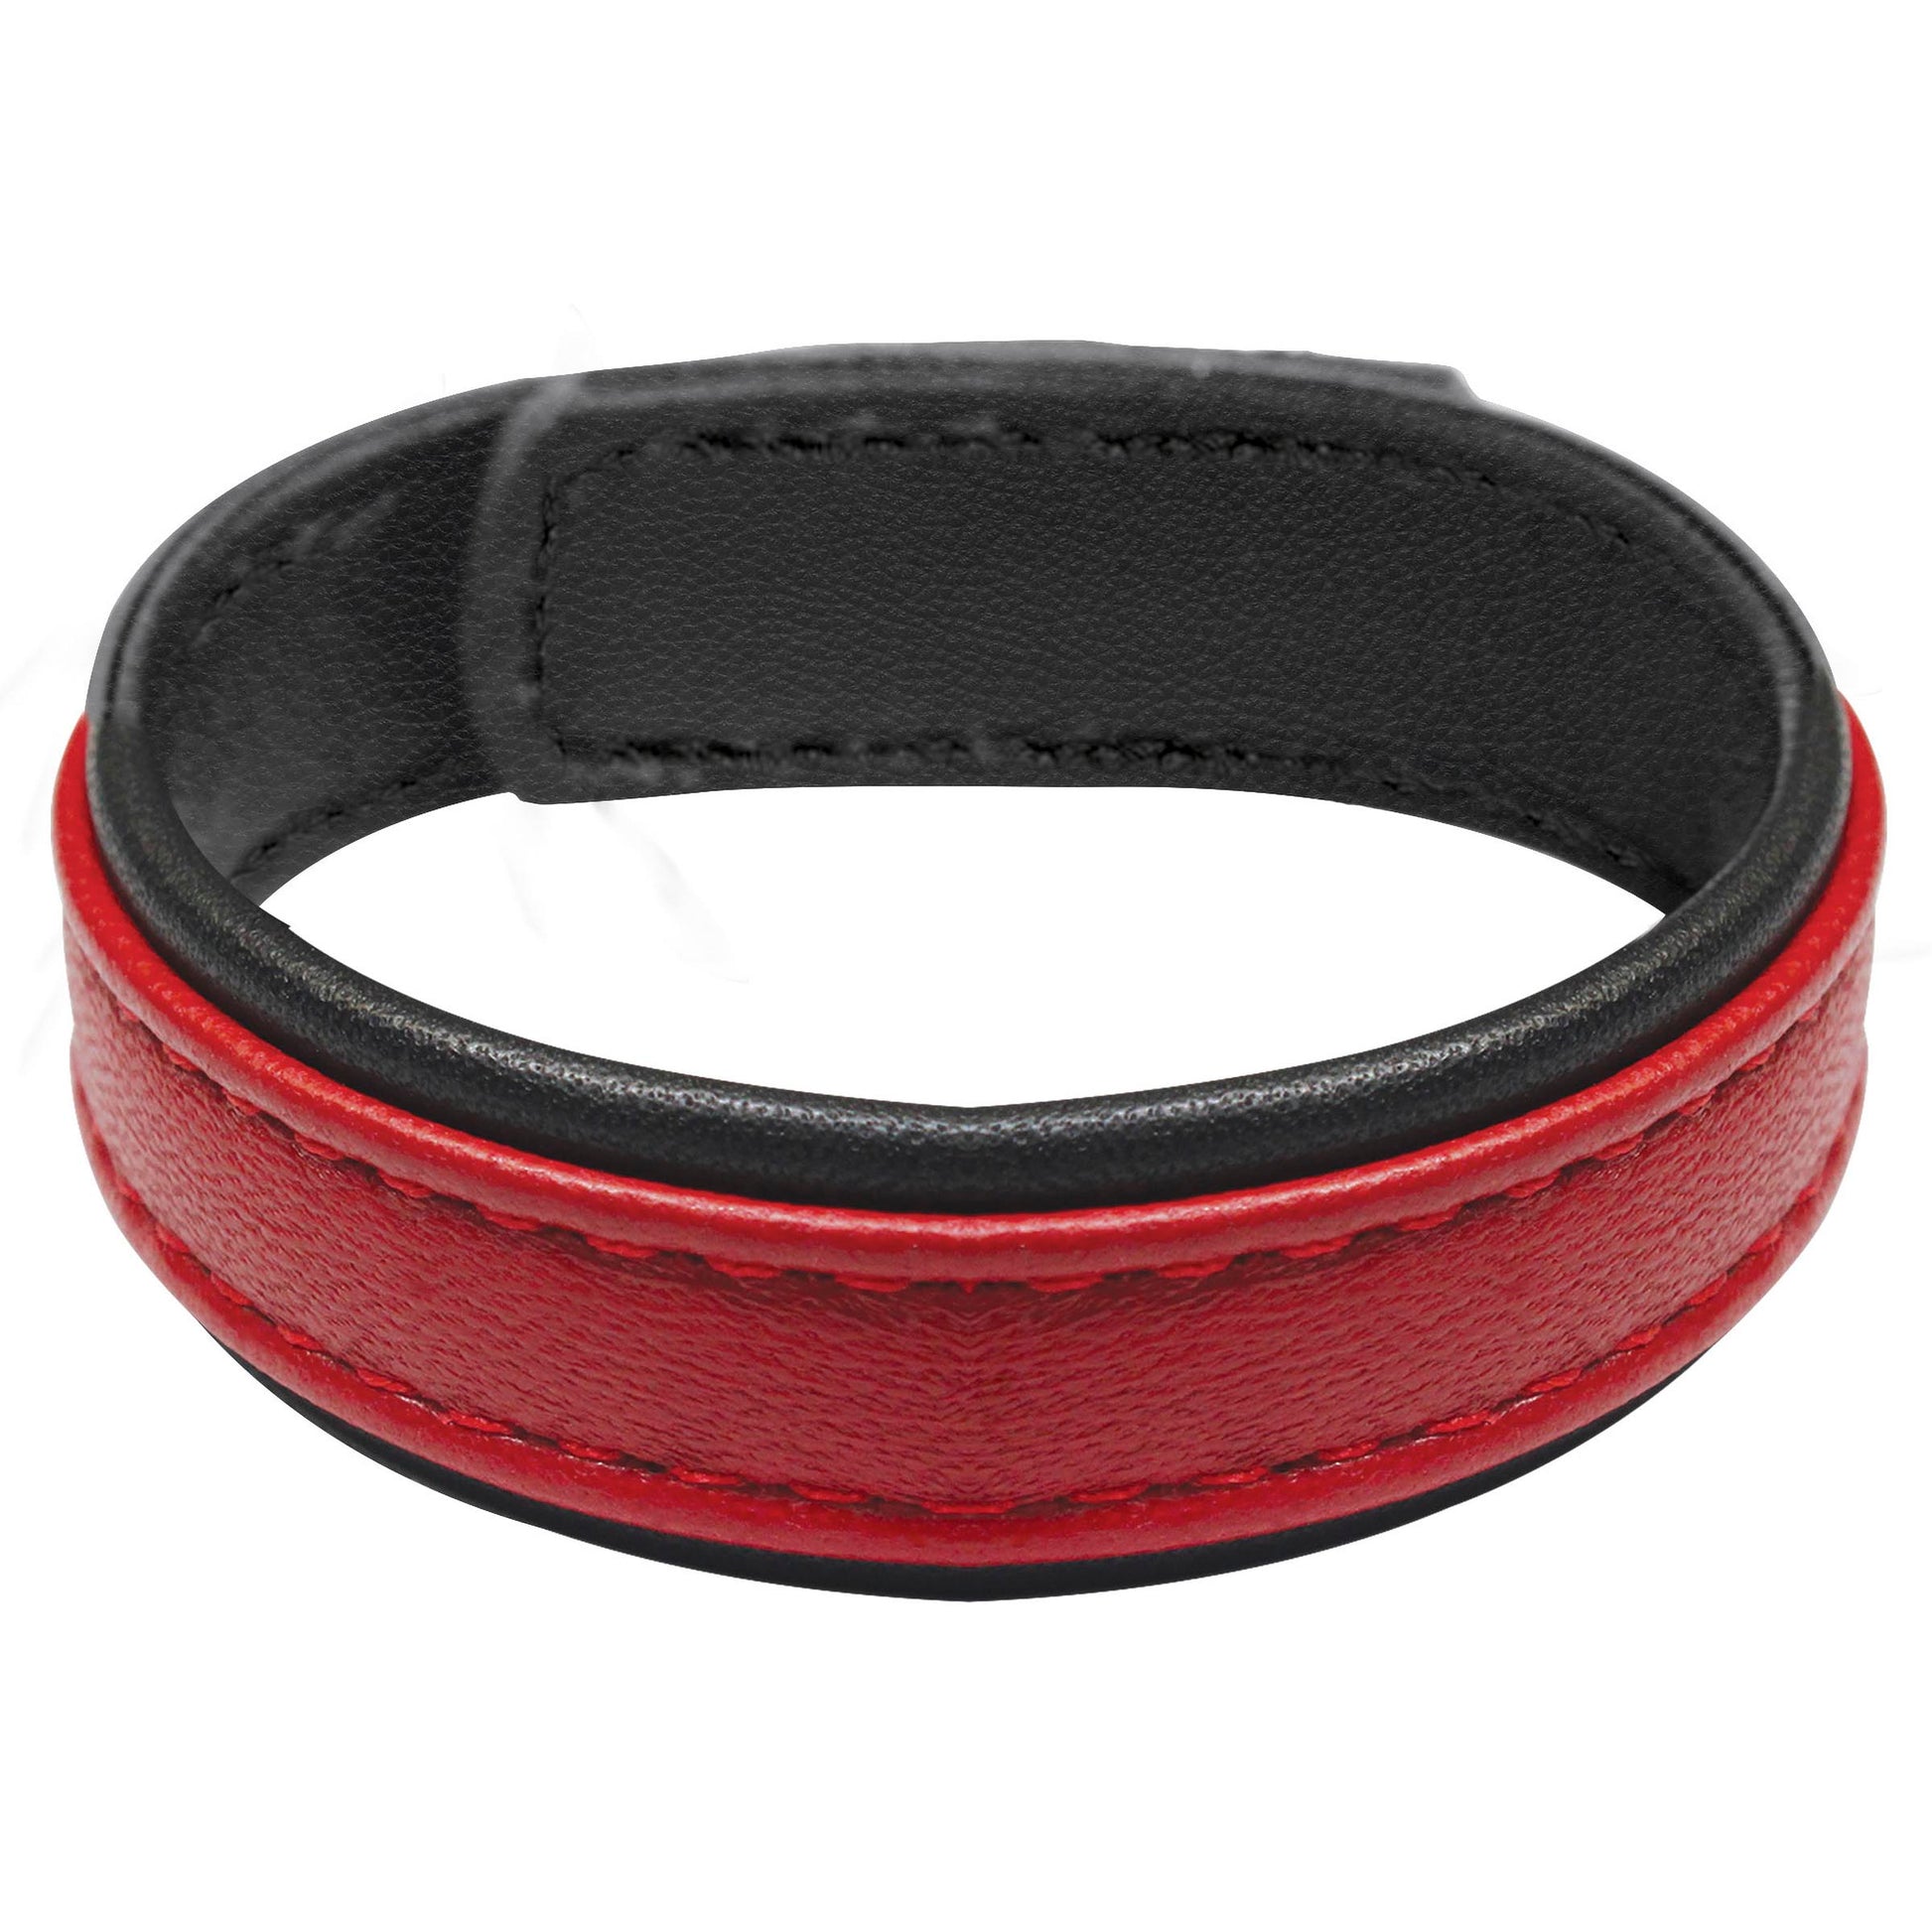 Velcro Leather Cock Ring - Red - UABDSM